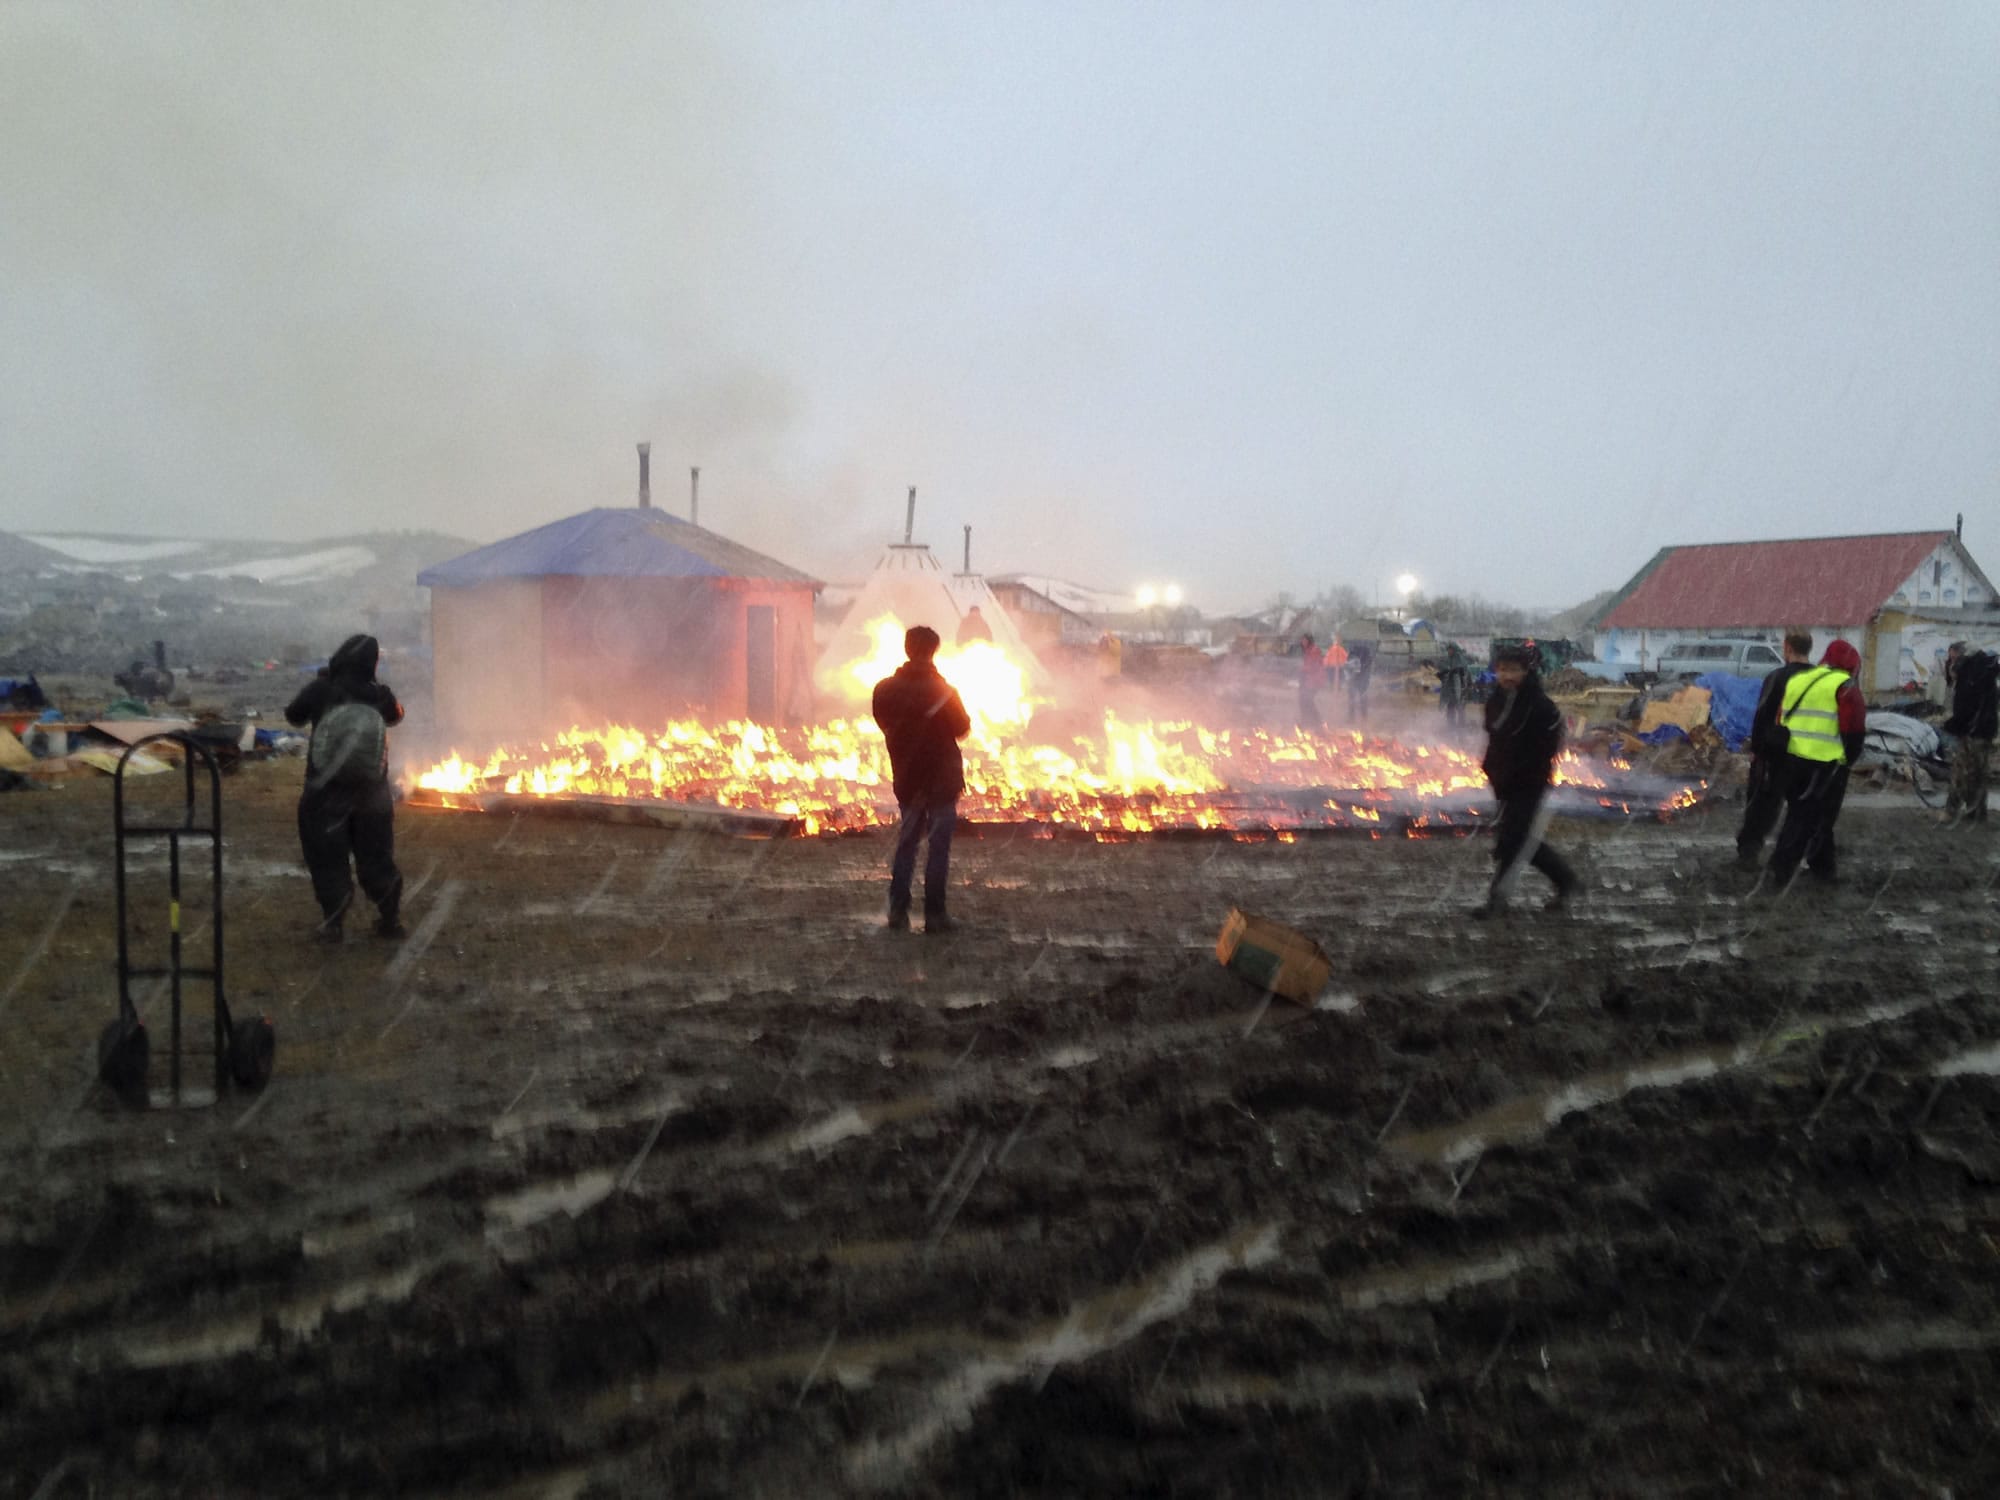 Dakota Access pipeline opponents burn structures in their main protest camp in southern North Dakota near Cannon Ball, N.D., on Wednesday, Feb. 22, 2017, as authorities prepare to shut down the camp in advance of spring flooding season.